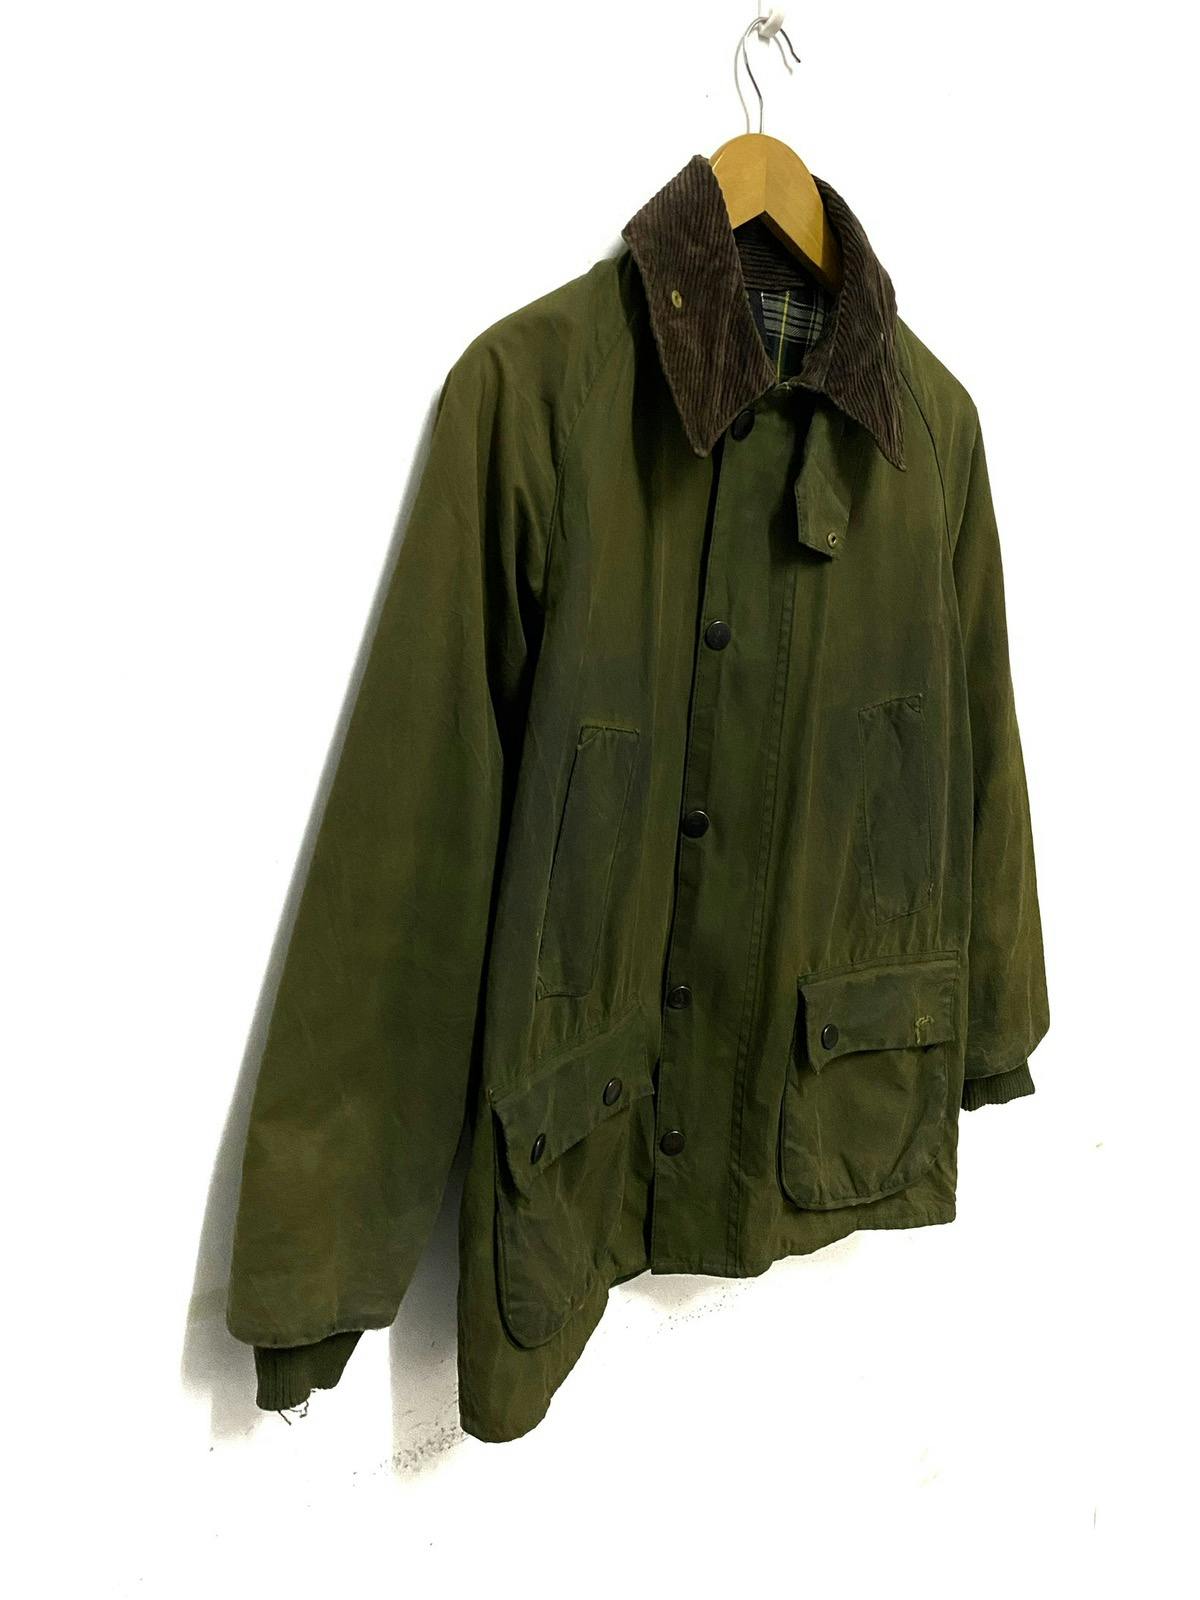 Barbour Bedale A100 Wax Jacket Made in England - 3